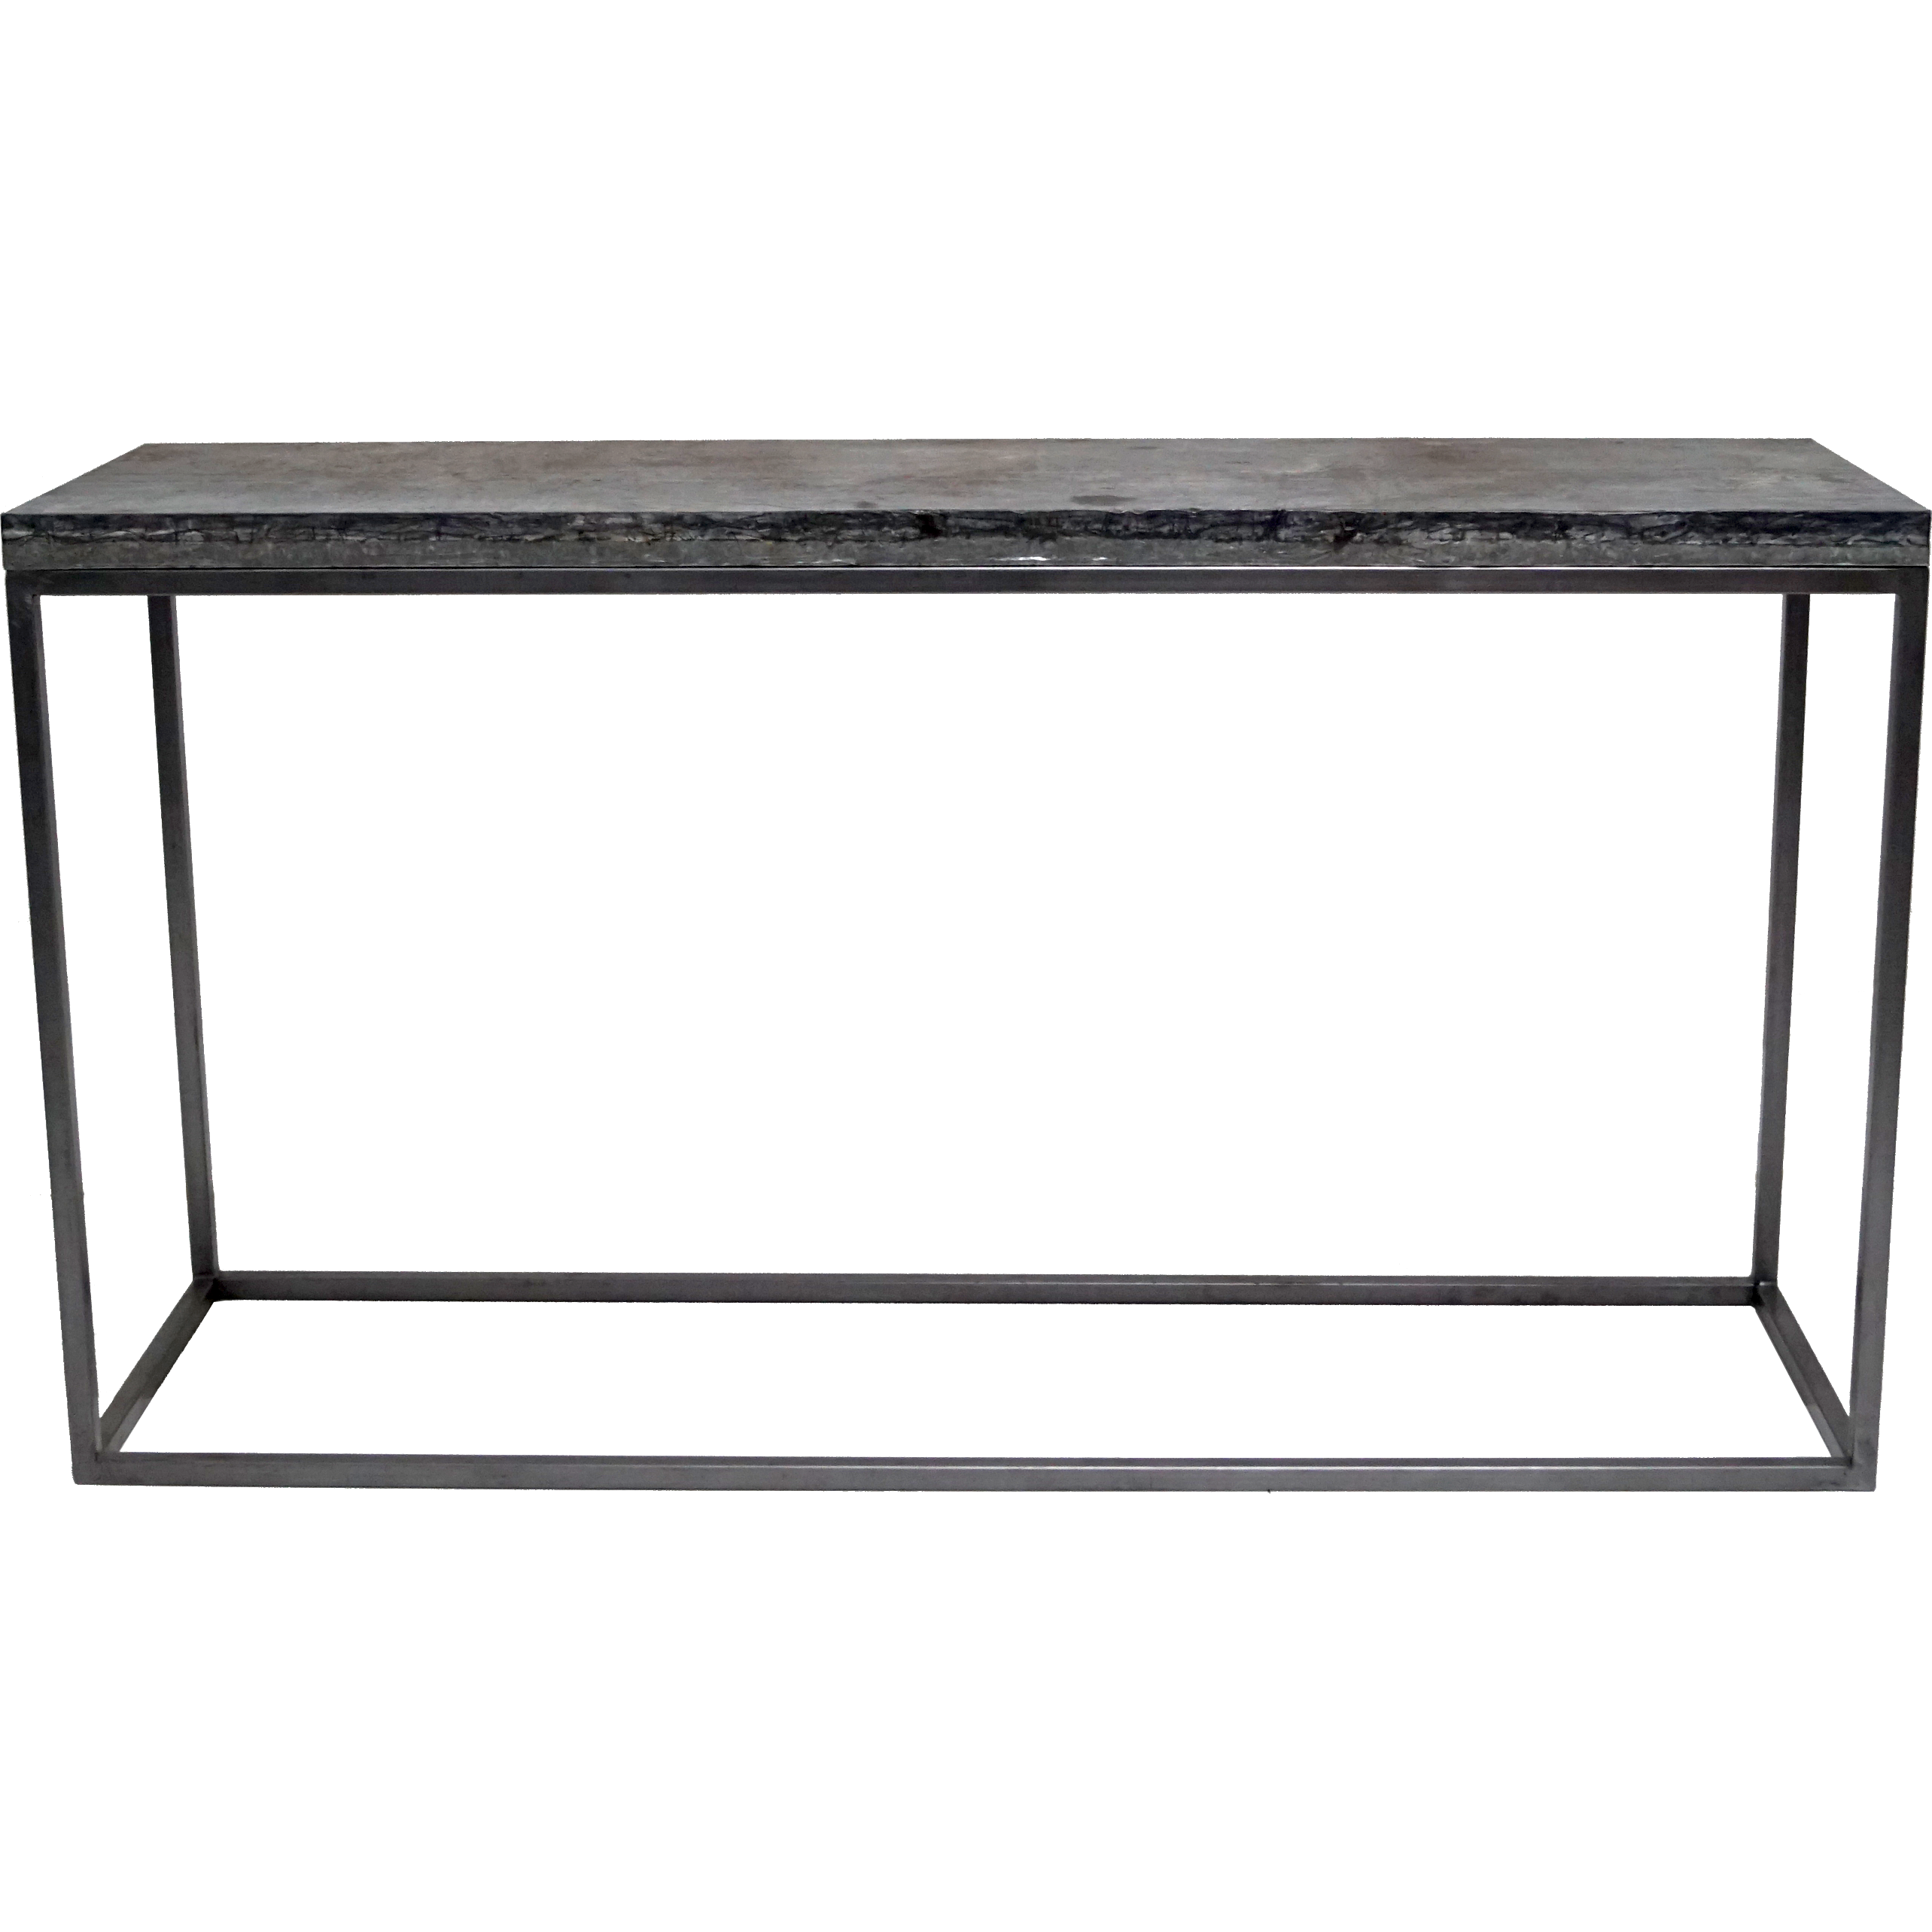 Trademark Living Houston Console Table Raw and Simple